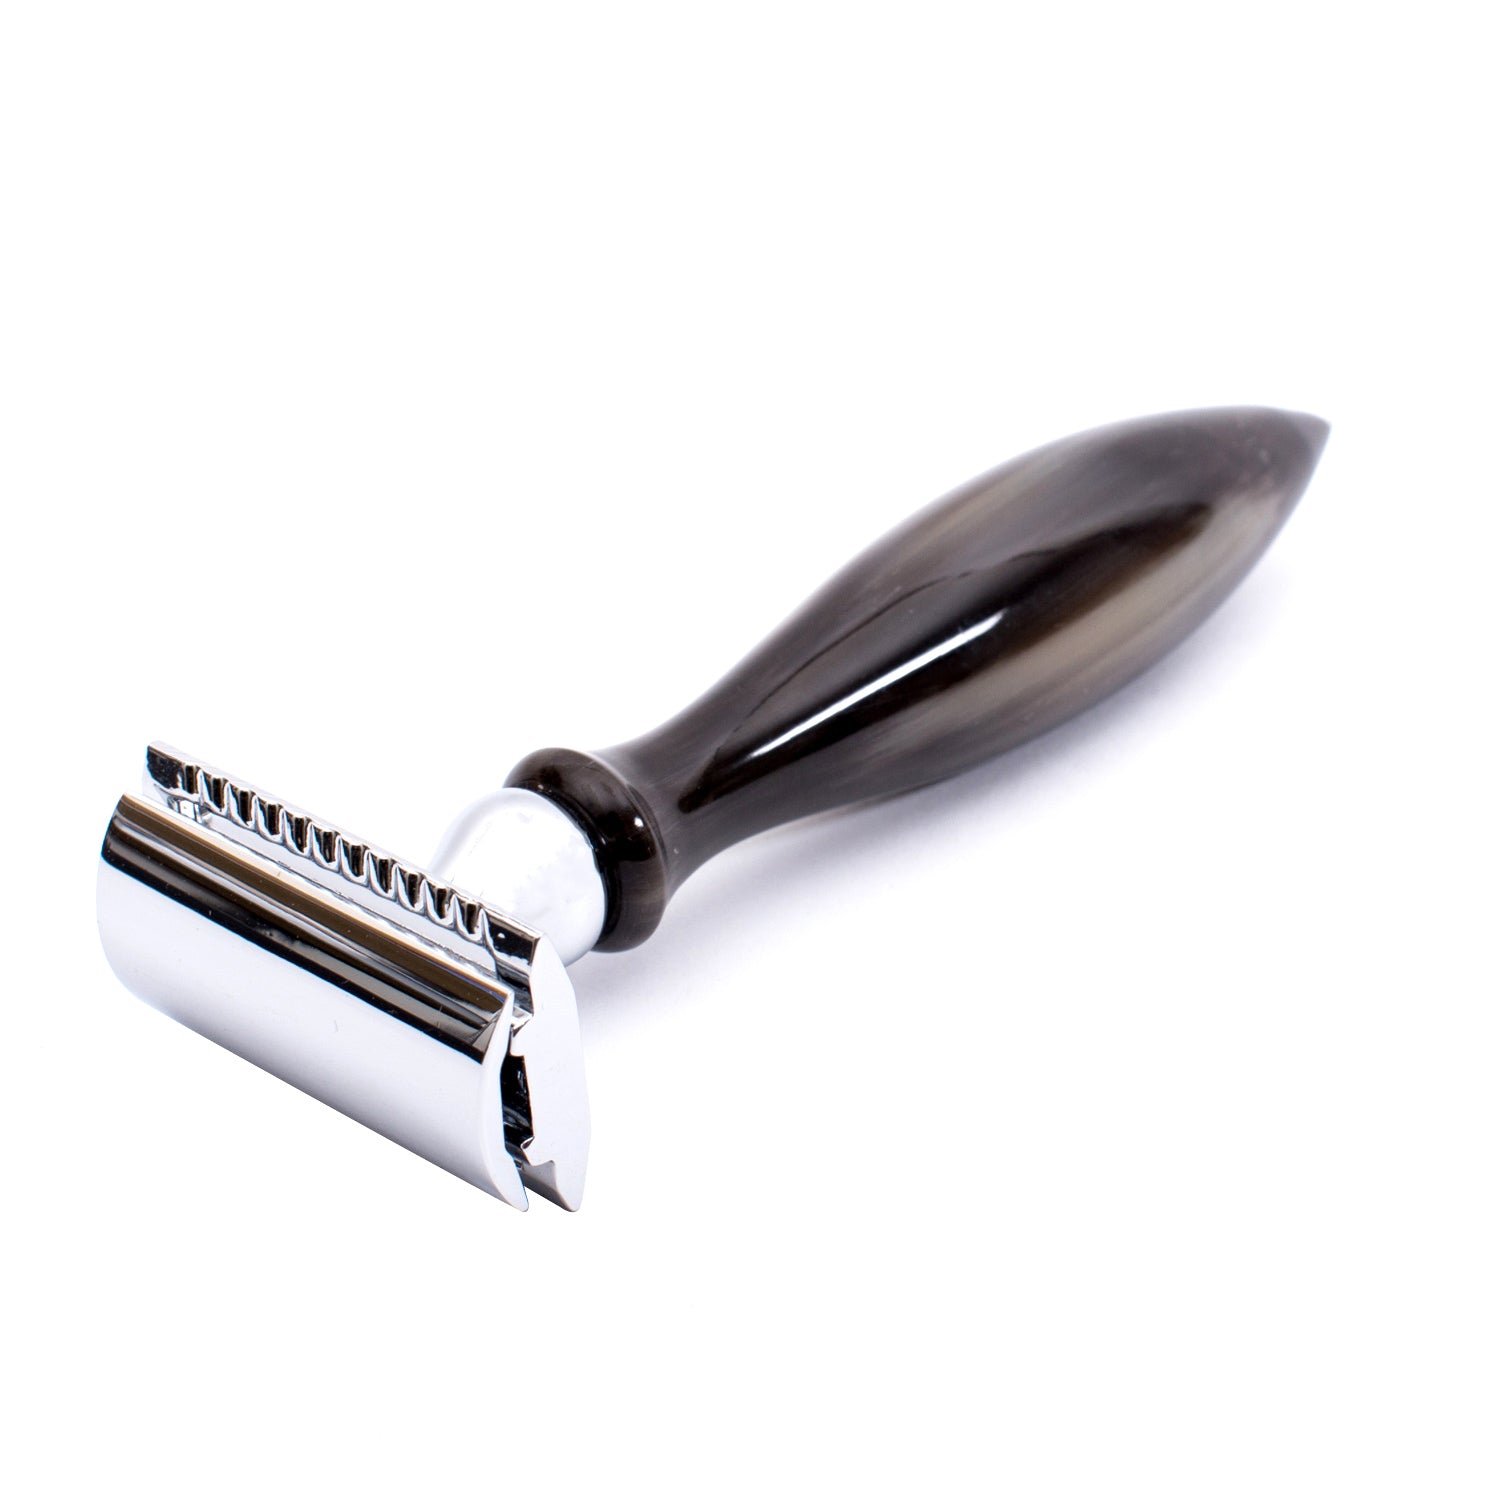 A KirbyAllison.com Parker 3-Piece Horn Safety Razor with black and white handle finishes on a white background.